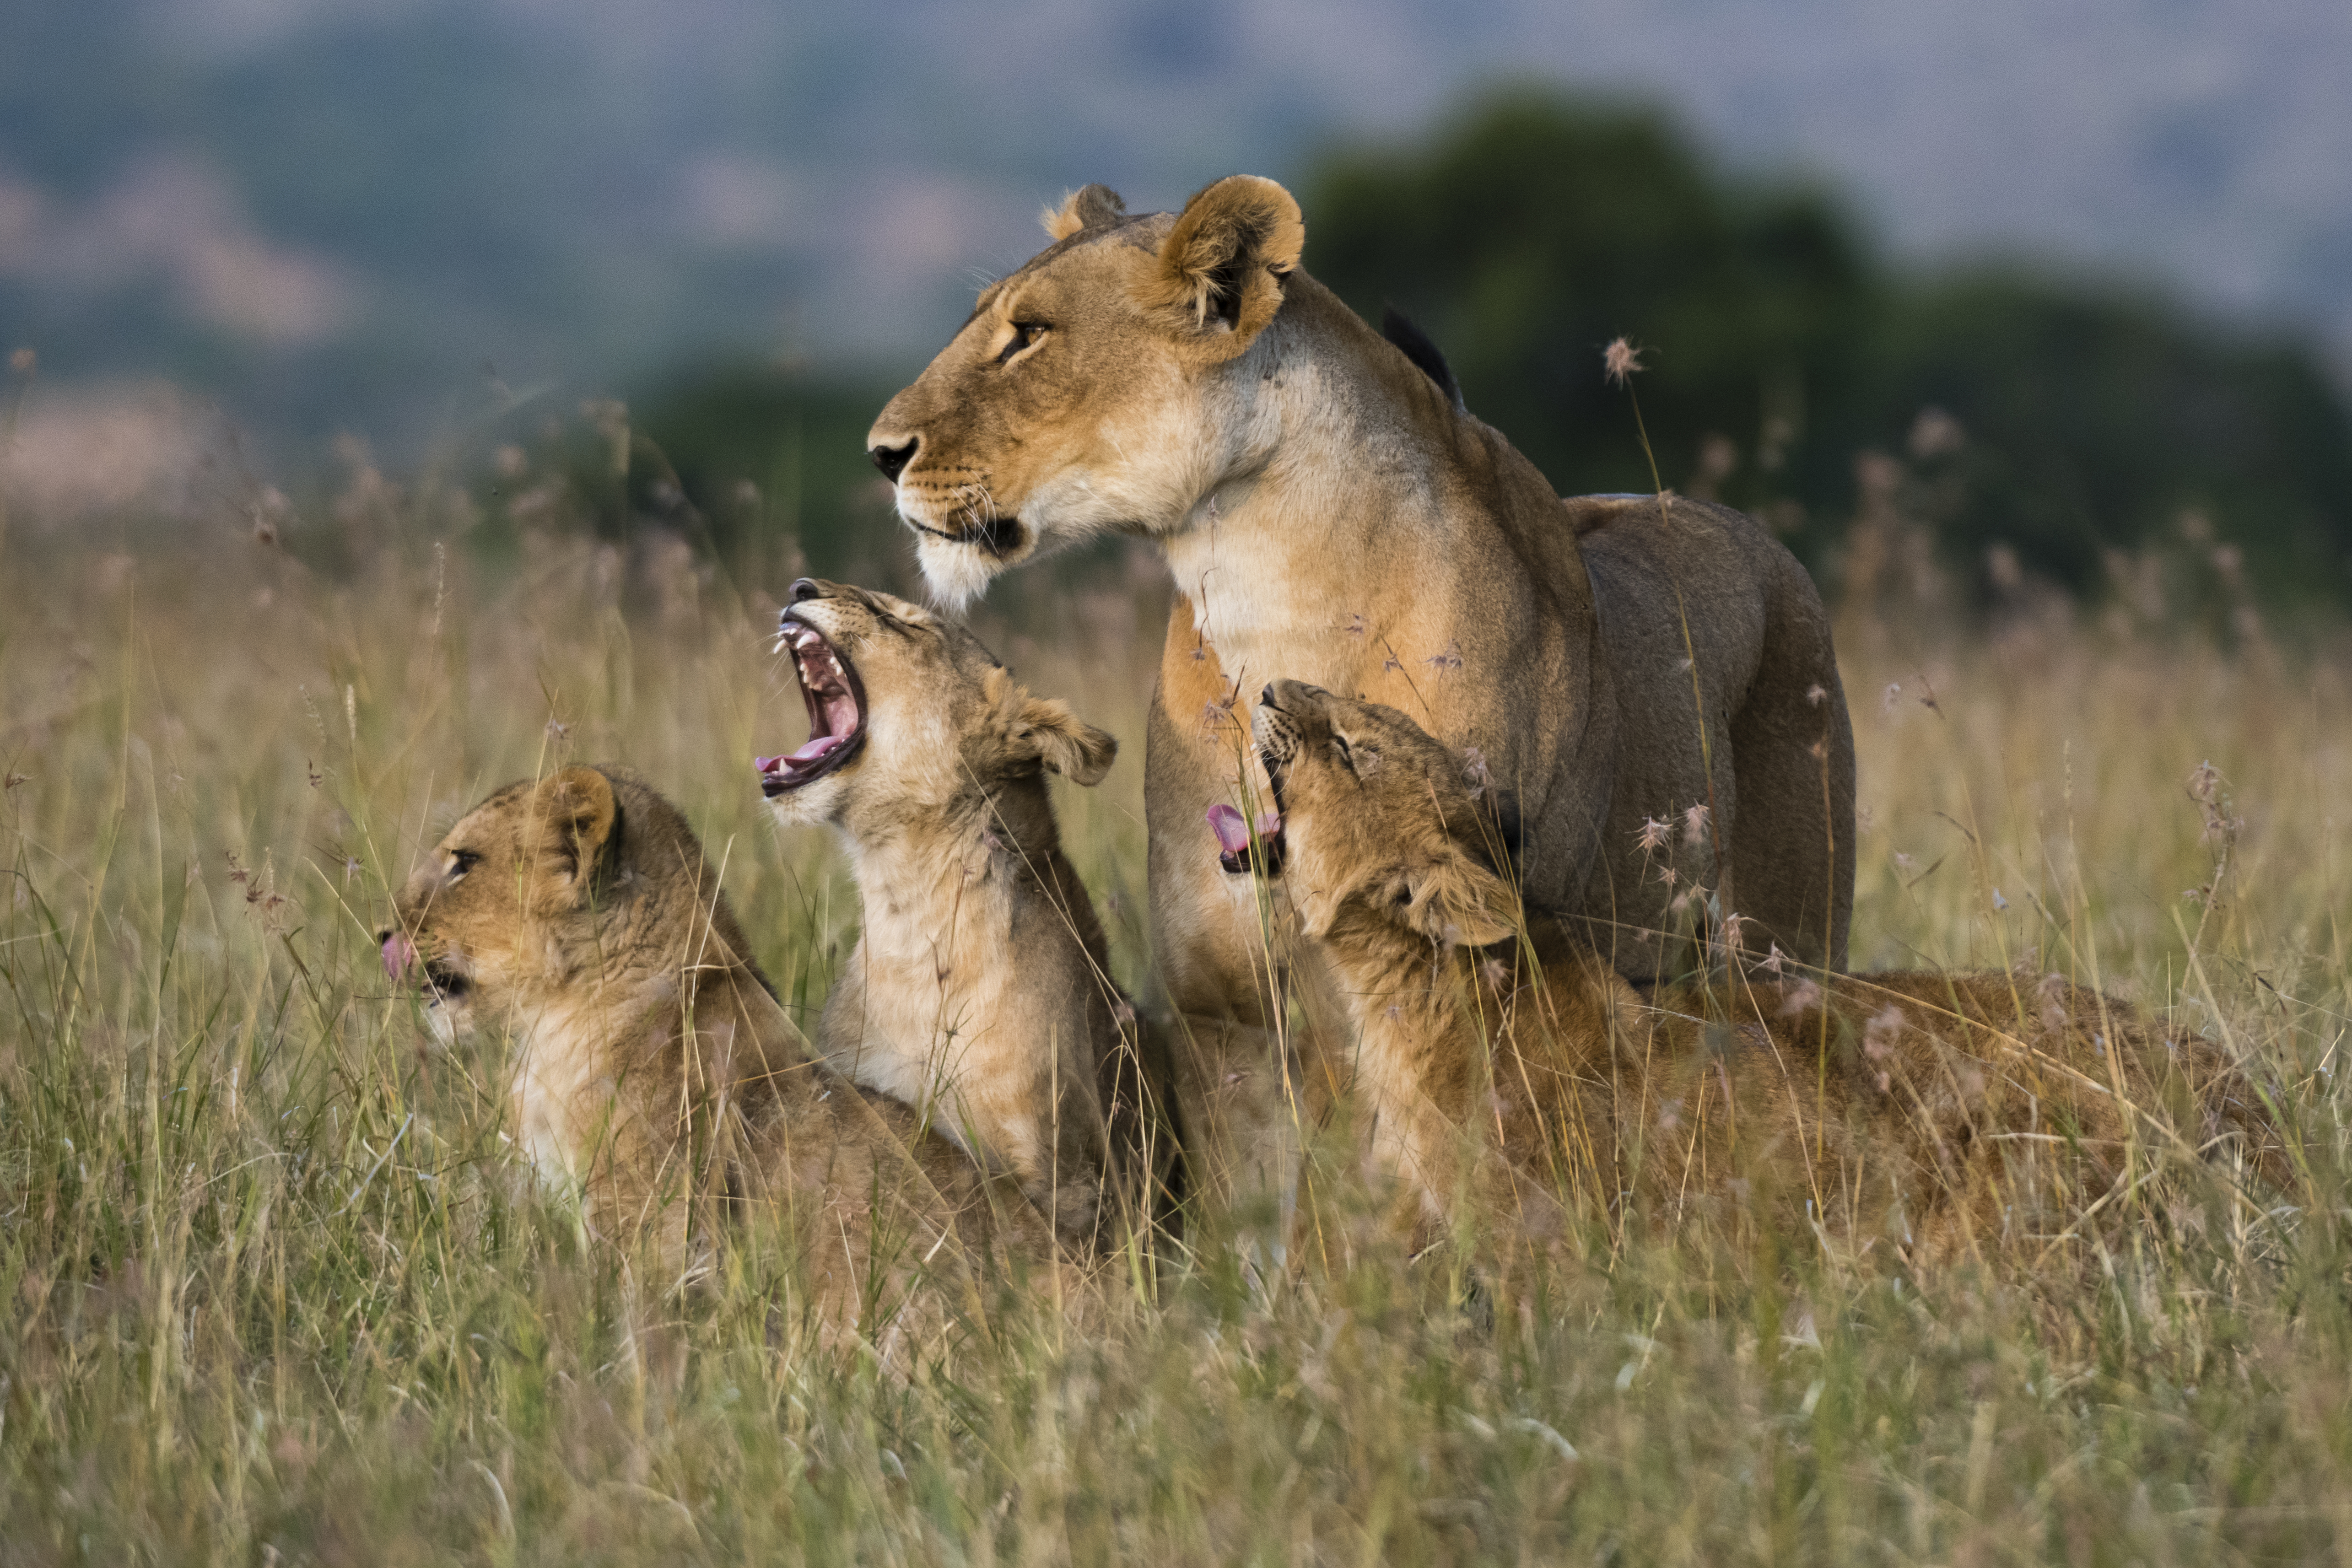 "A lioness, Panthera leo, greeted by the her cubs upon her return, Masai Mara, Kenya."